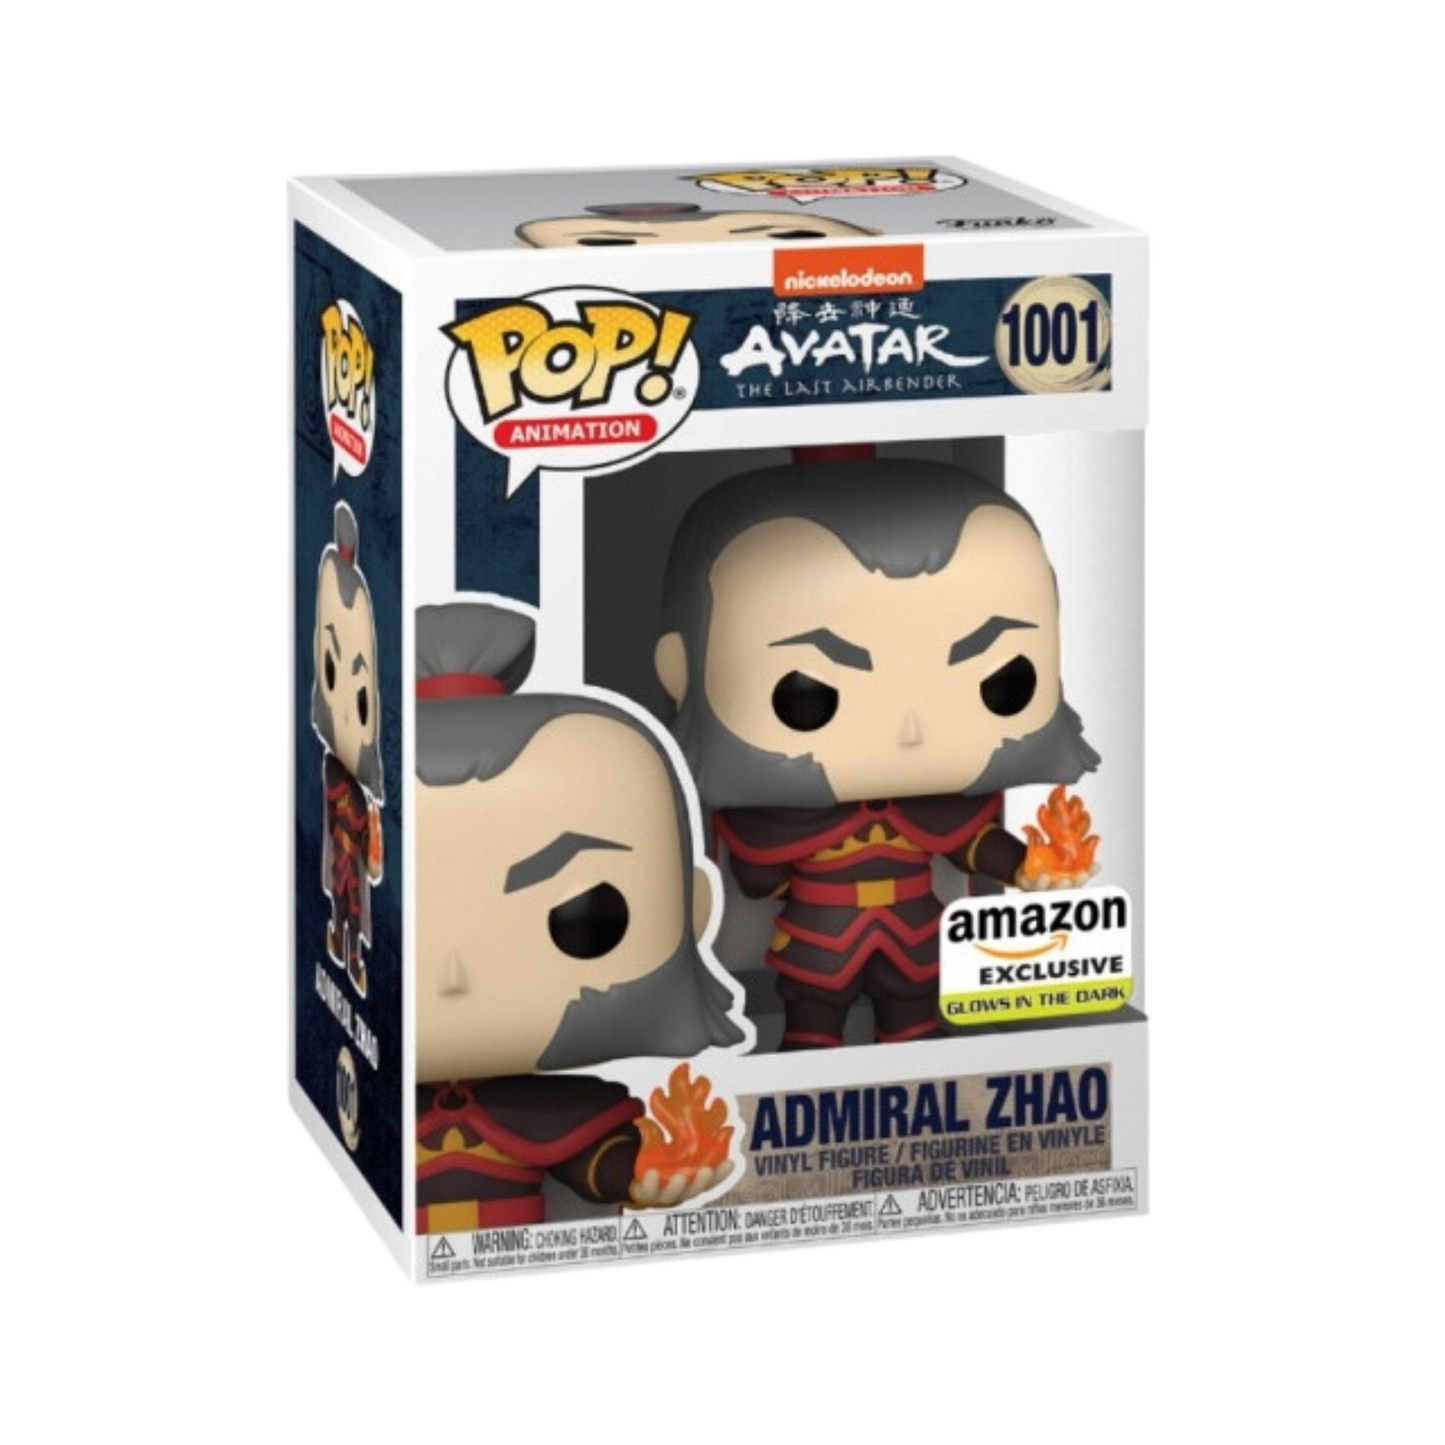 POP! Animation: Avatar: The Last Airbender - Admiral Zhao (Glow) #1001 (Amazon Exclusive)